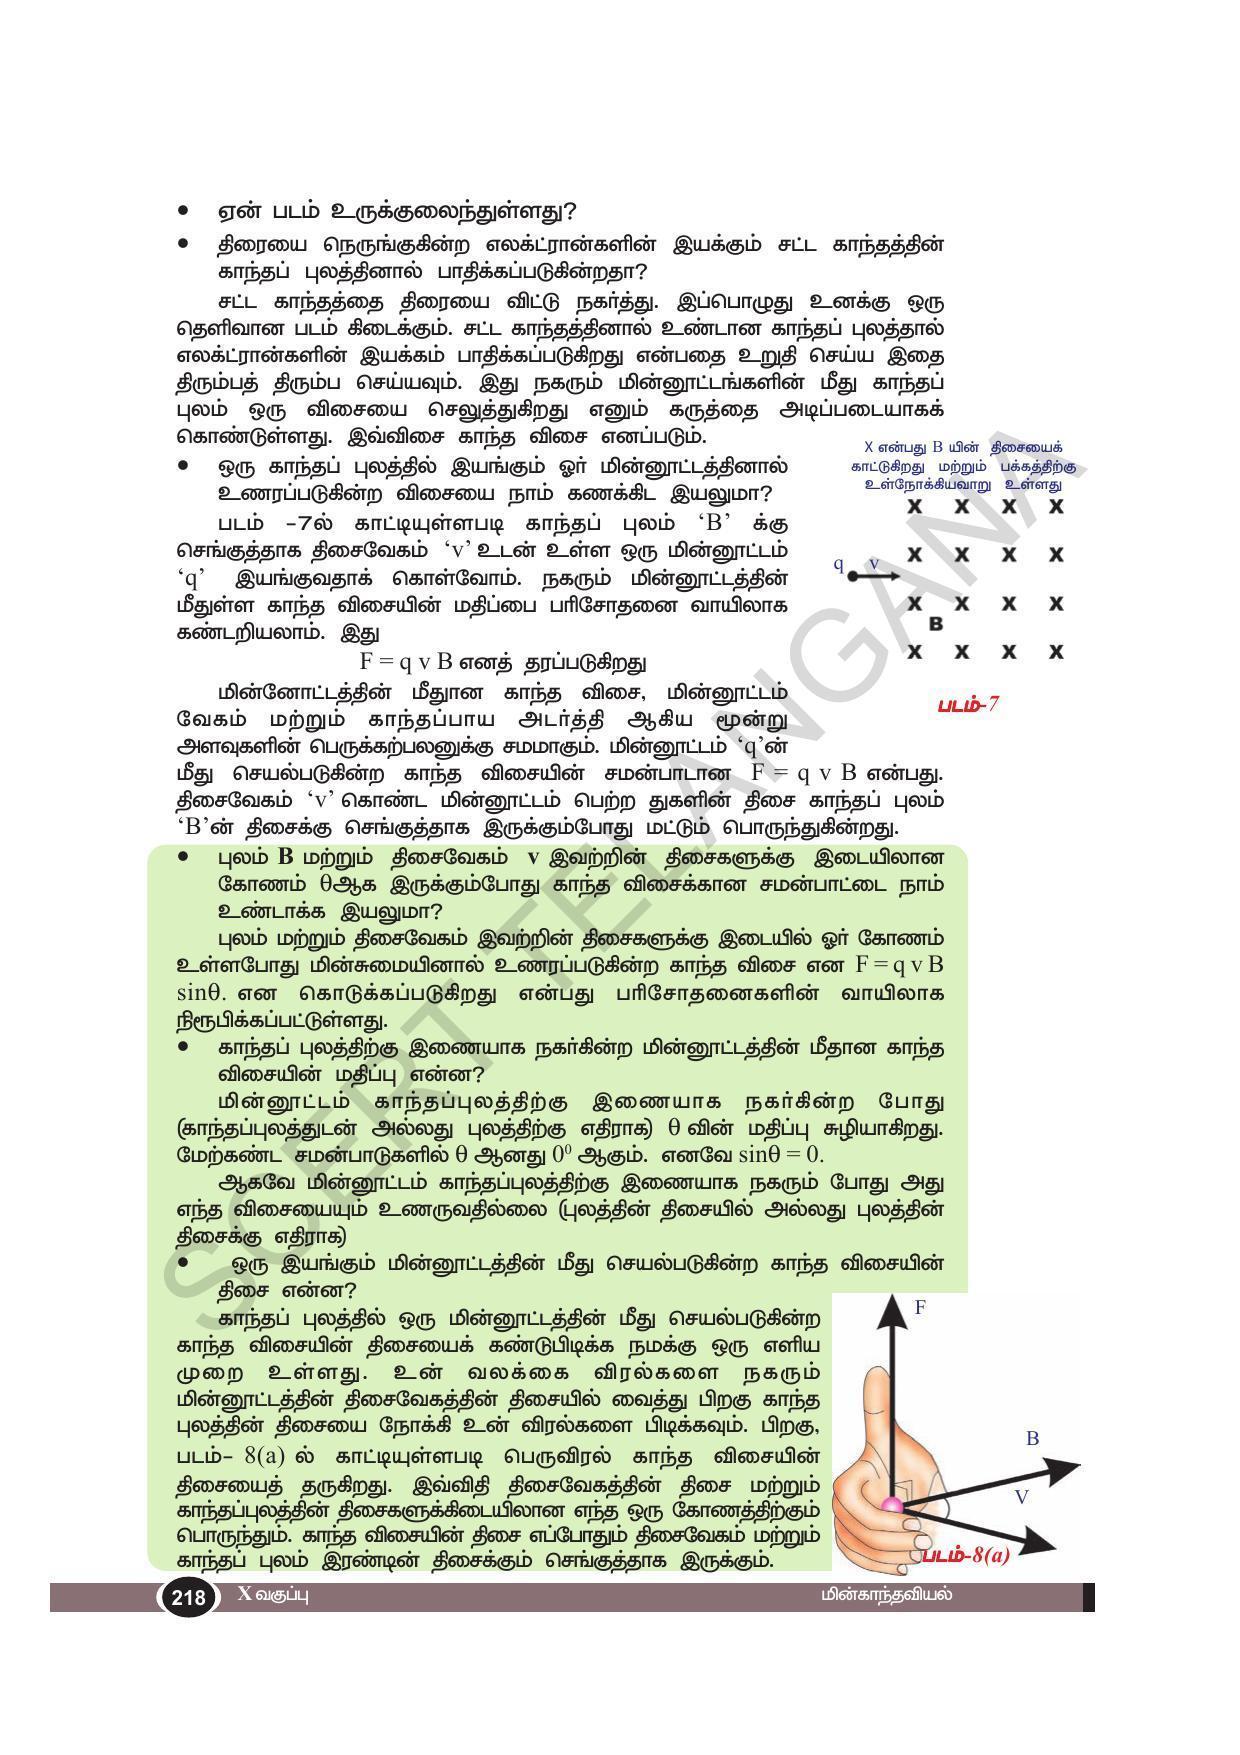 TS SCERT Class 10 Physical Science(Tamil Medium) Text Book - Page 230